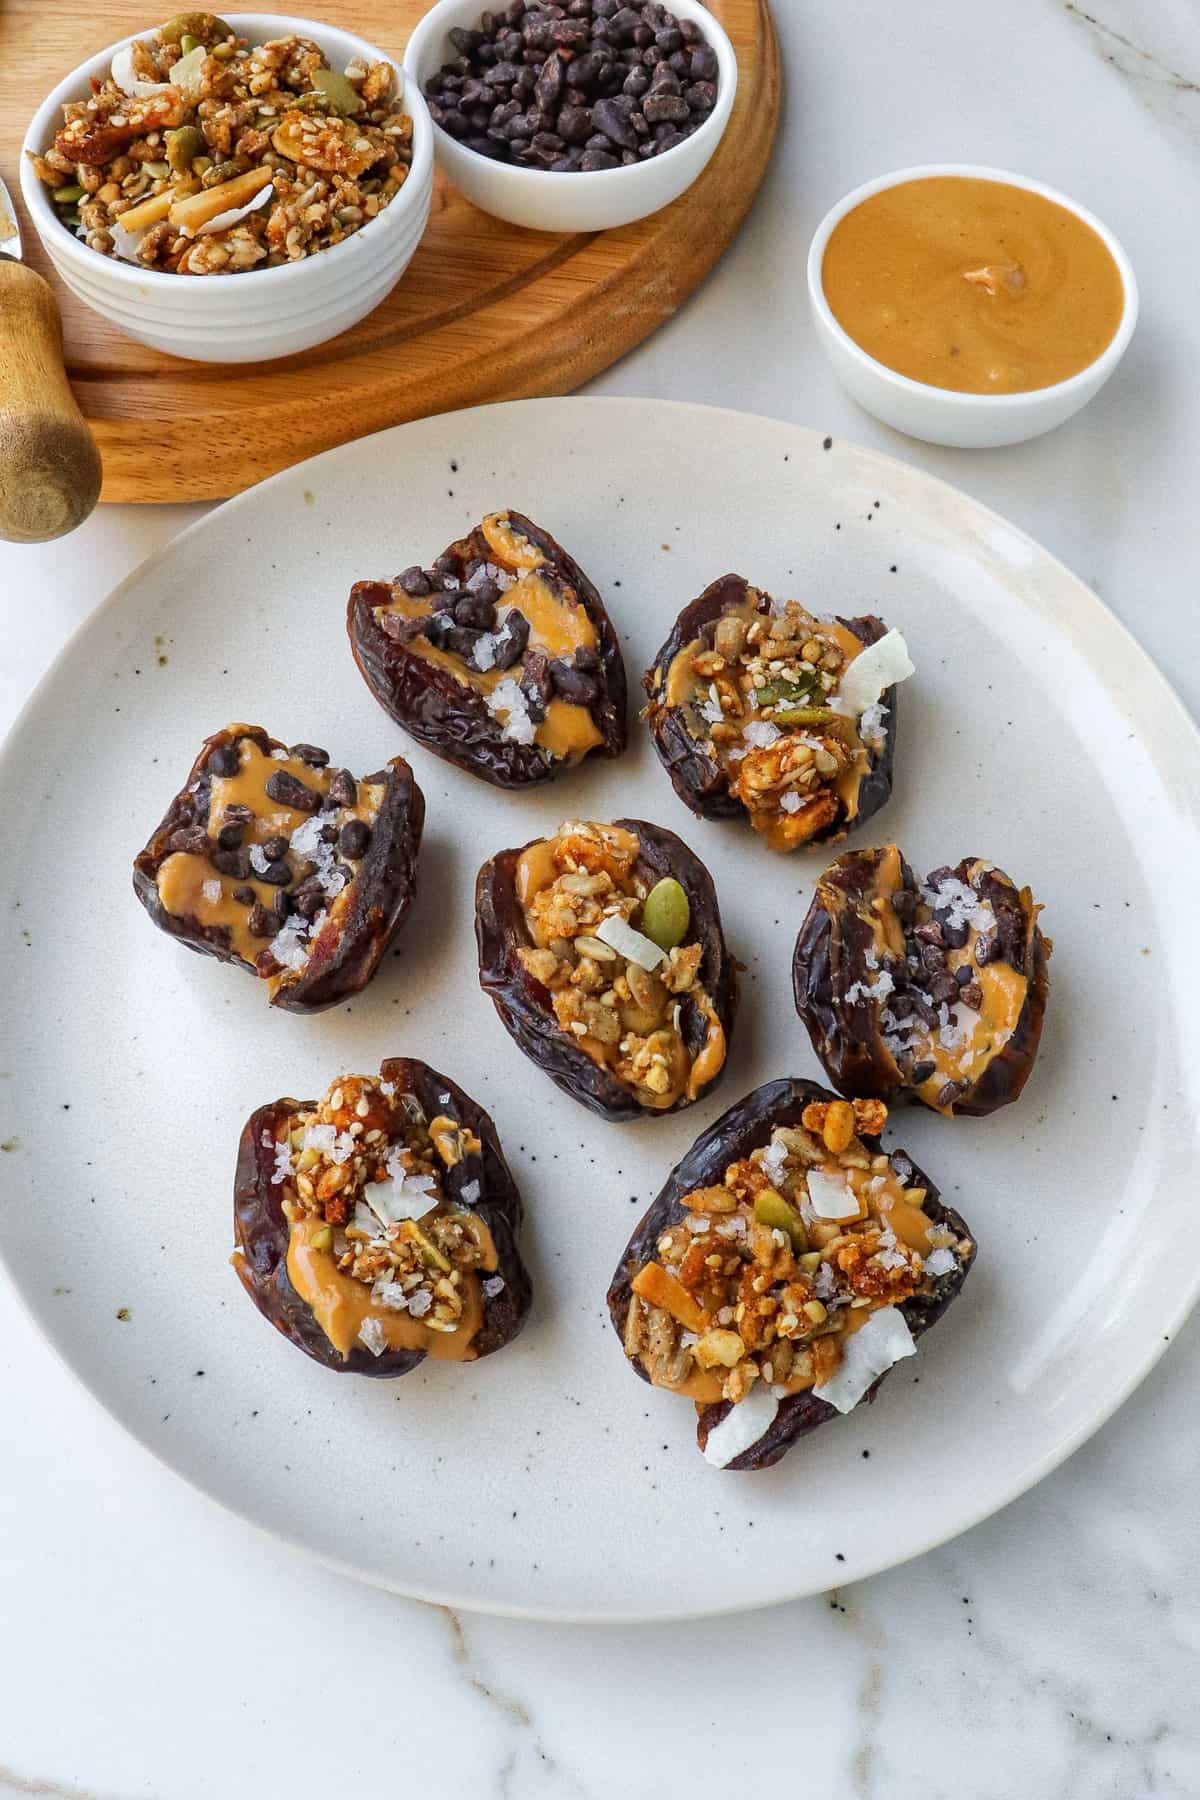 Side shot of peanut butter stuffed dates with granola and cacao nibs on a plate.